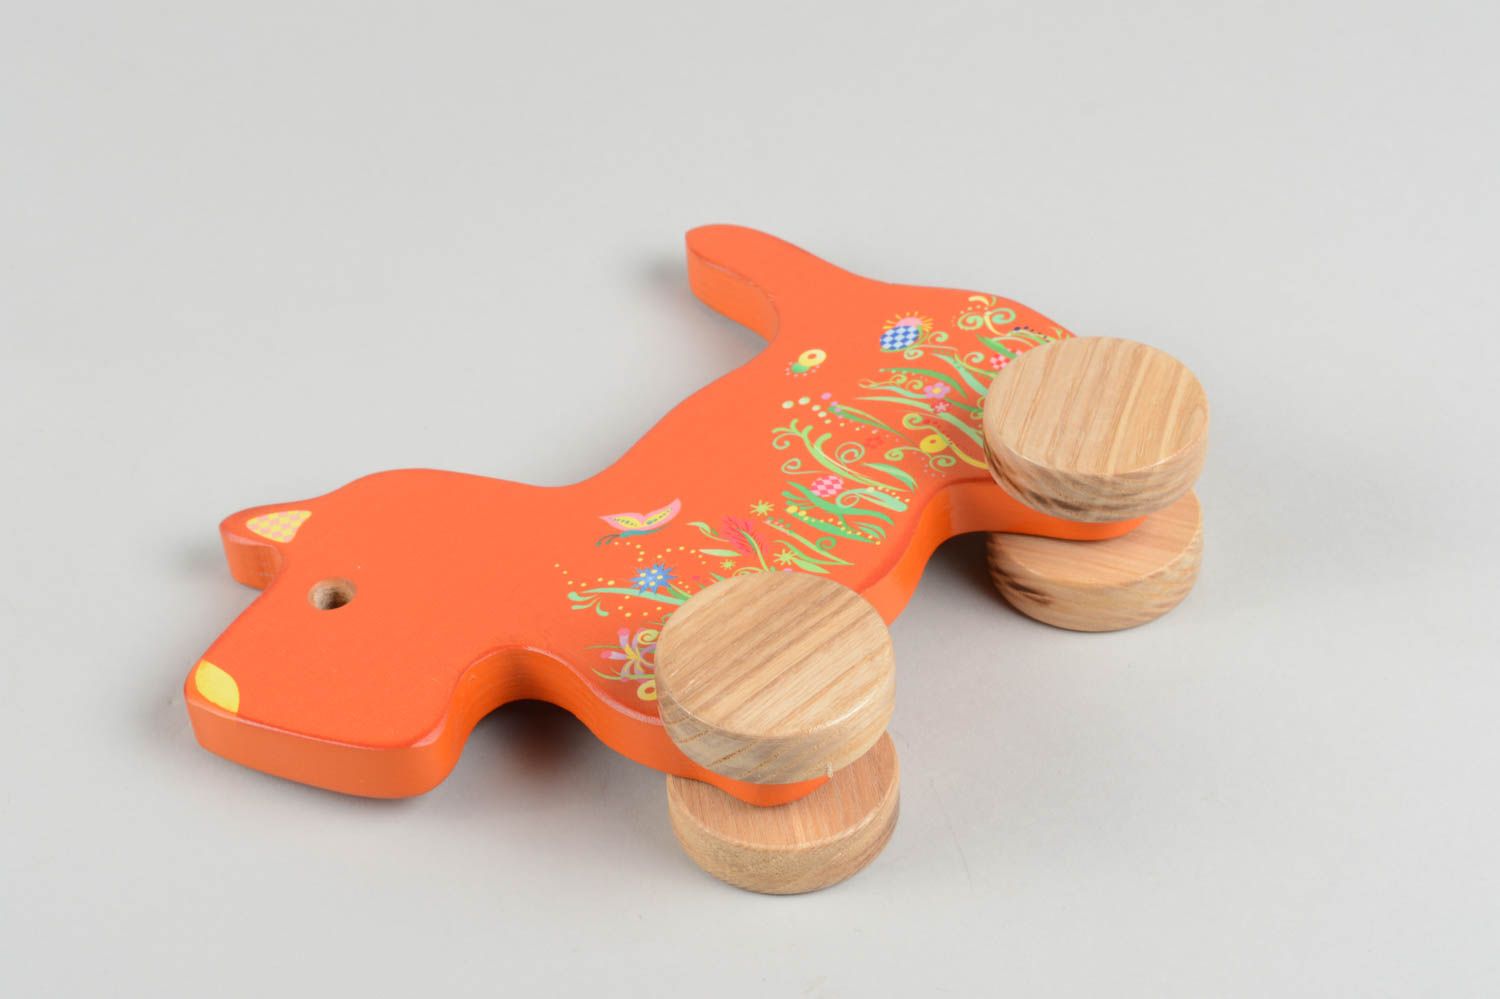 Handmade cute wooden toy unusual designer souvenir cute rolling toy for kids photo 3